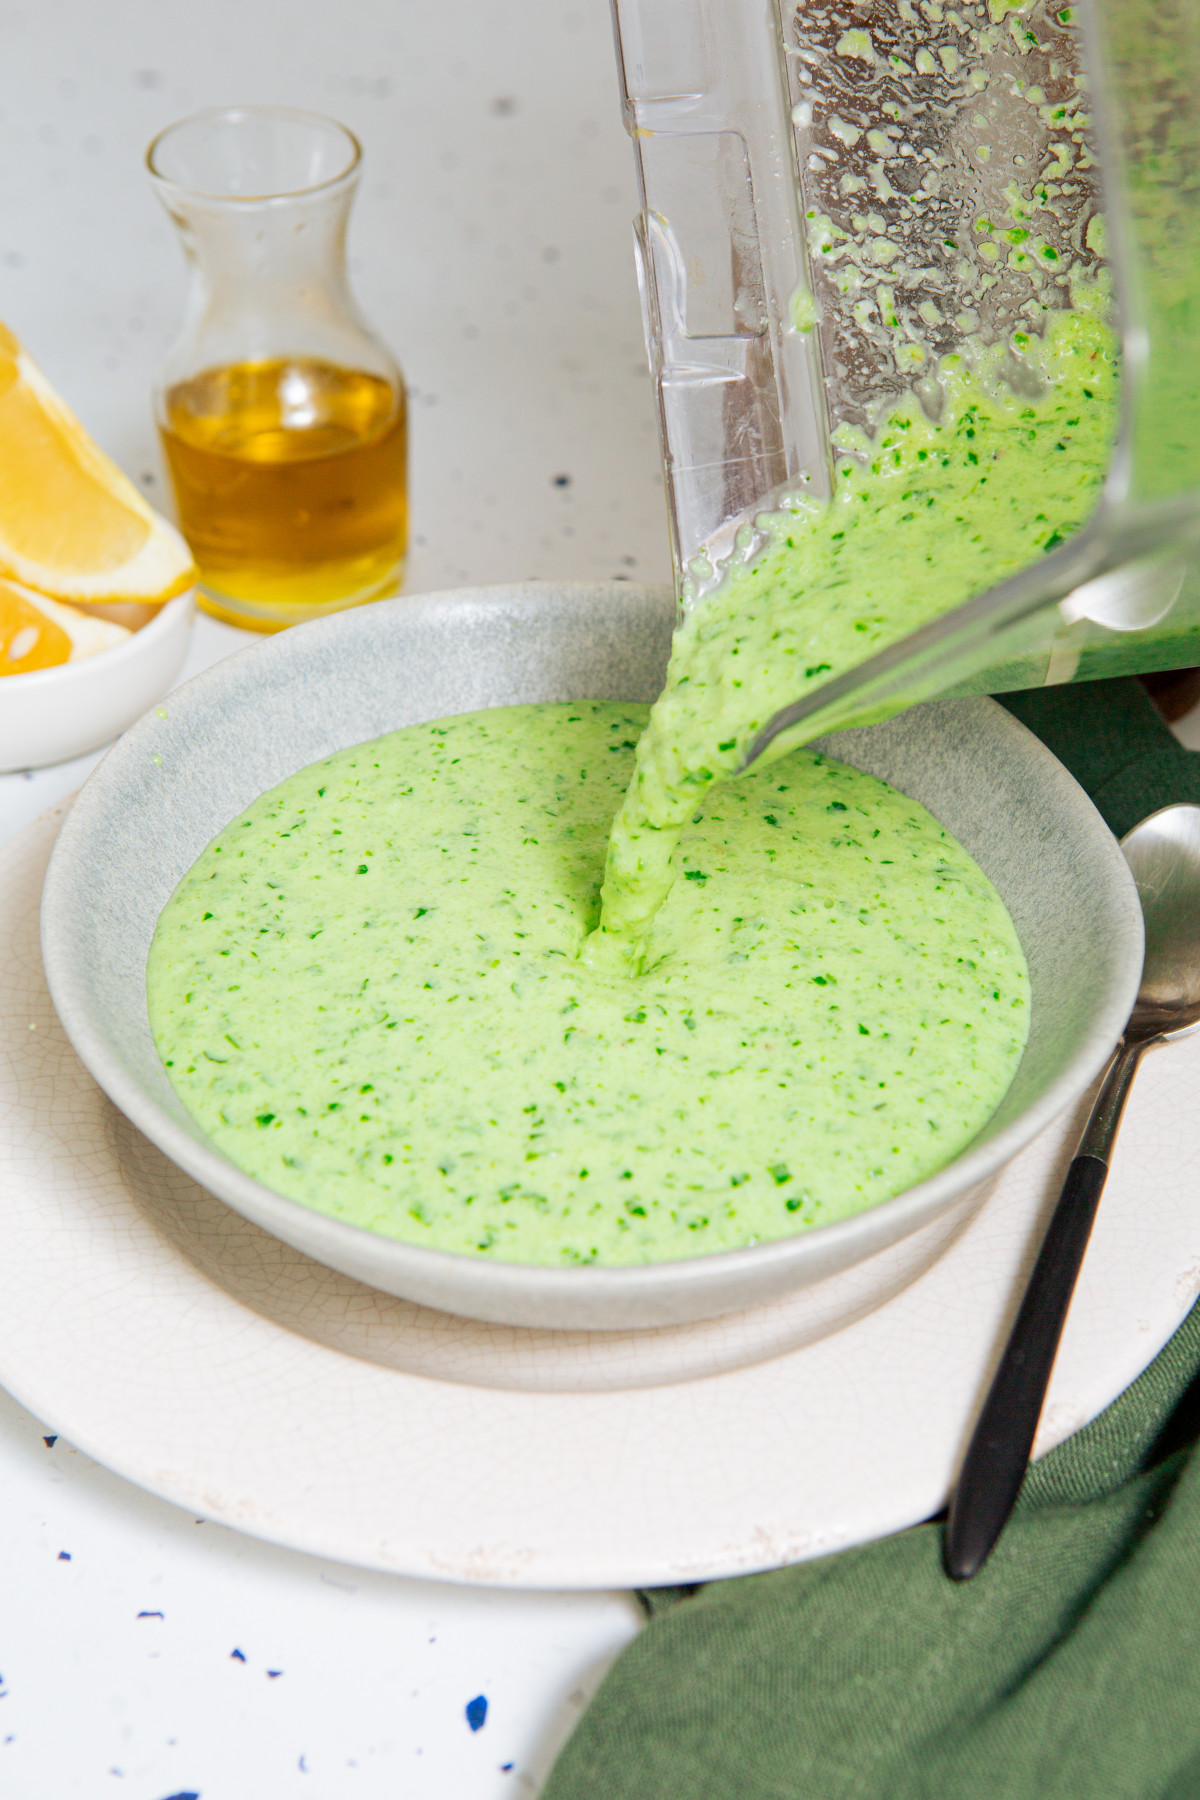 Pouring cold cucumber soup from a blender into a white bowl.